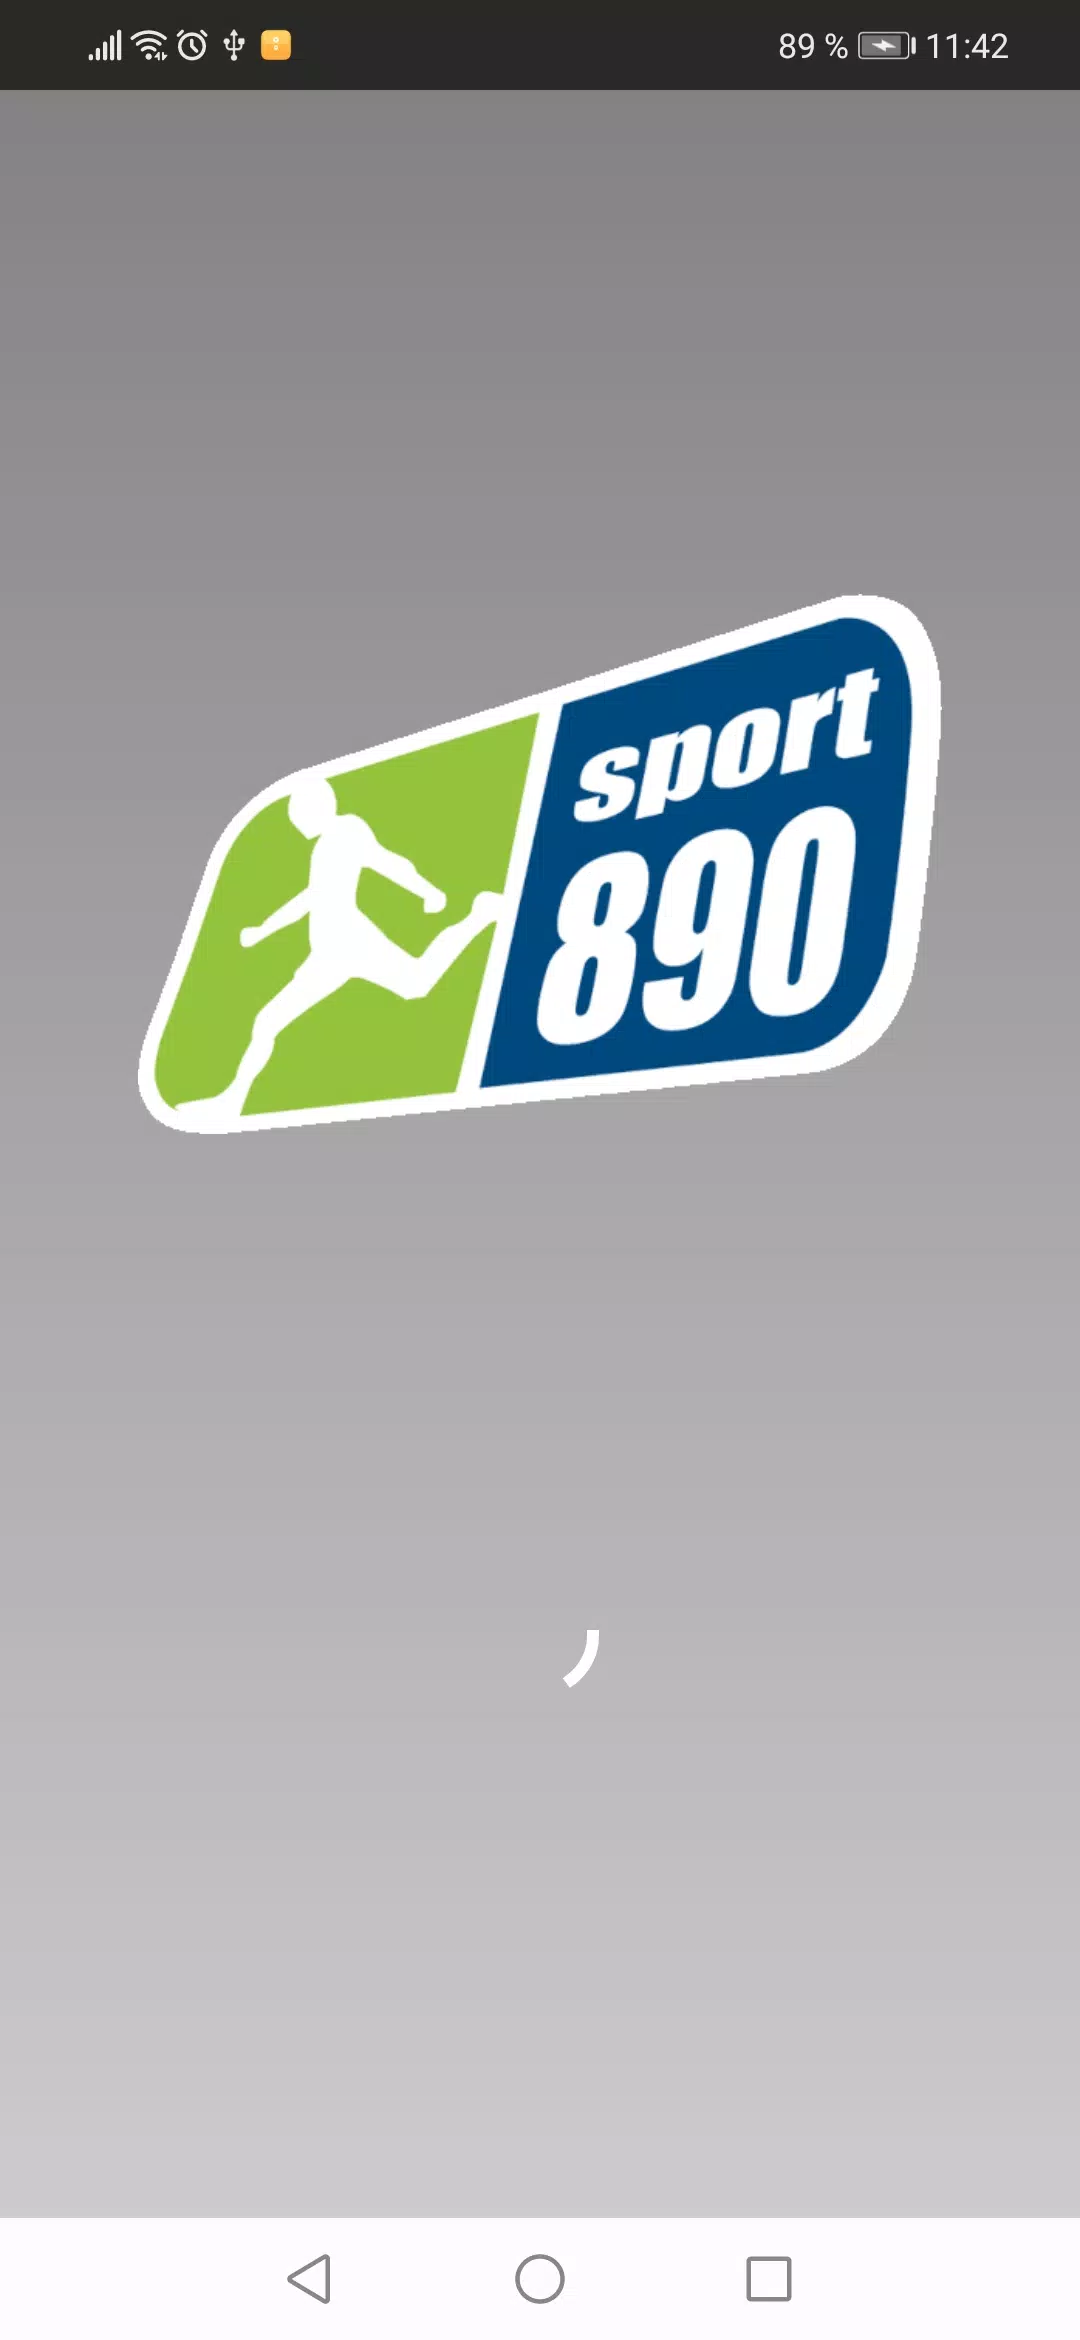 Radio Sport 890 APK for Android Download